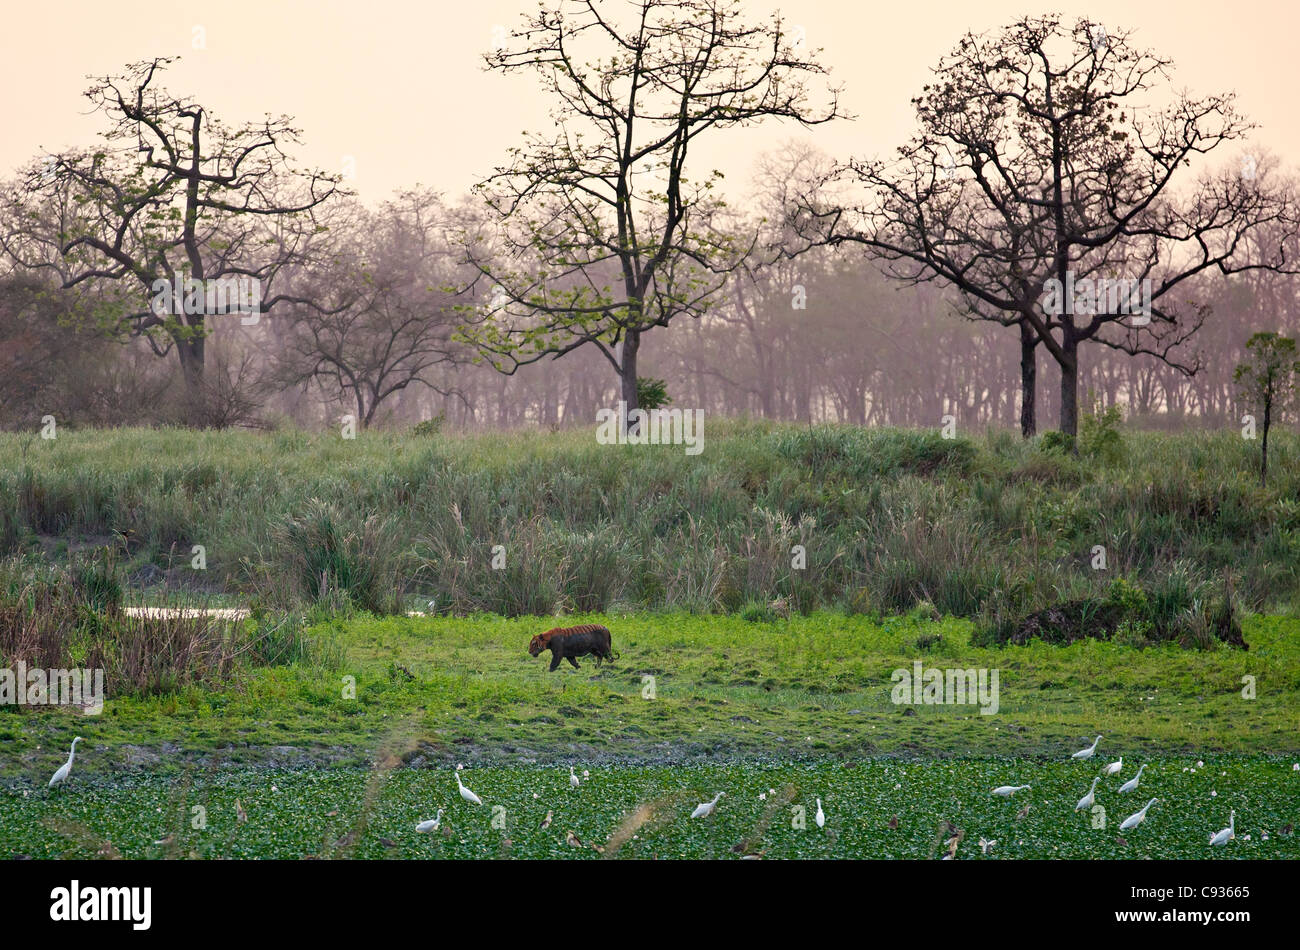 In the late afternoon, a Royal Bengal Tiger emerges from a muddy swamp in Kaziranga National Park. Stock Photo